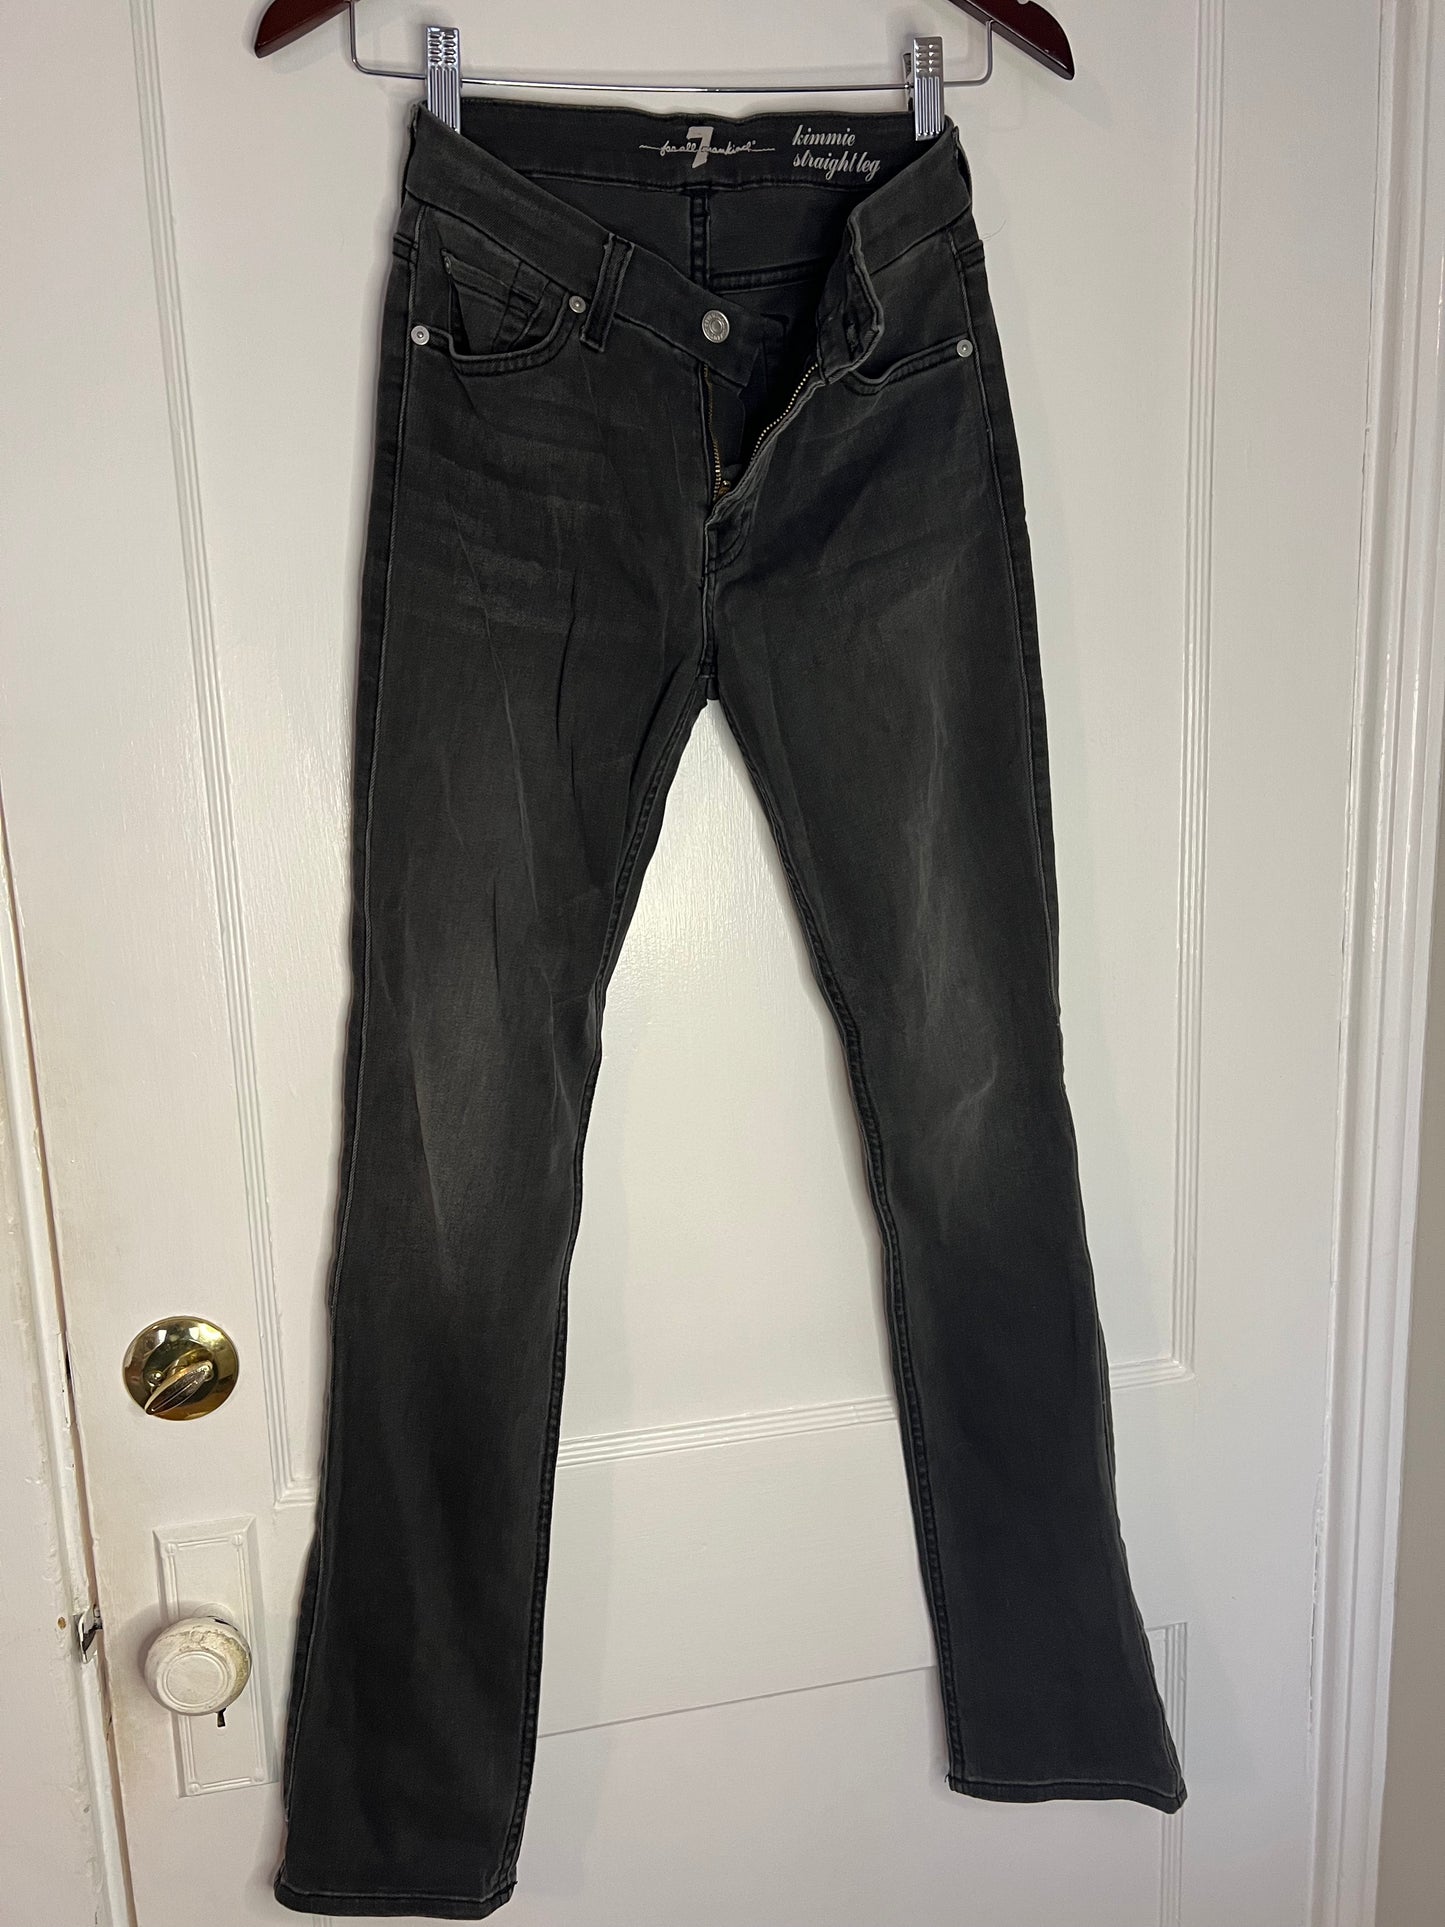 7 For All Mankind Grey Kimmie Straight Leg Denim Jeans Size 27 PPU 45208 or SCO Spring Sale